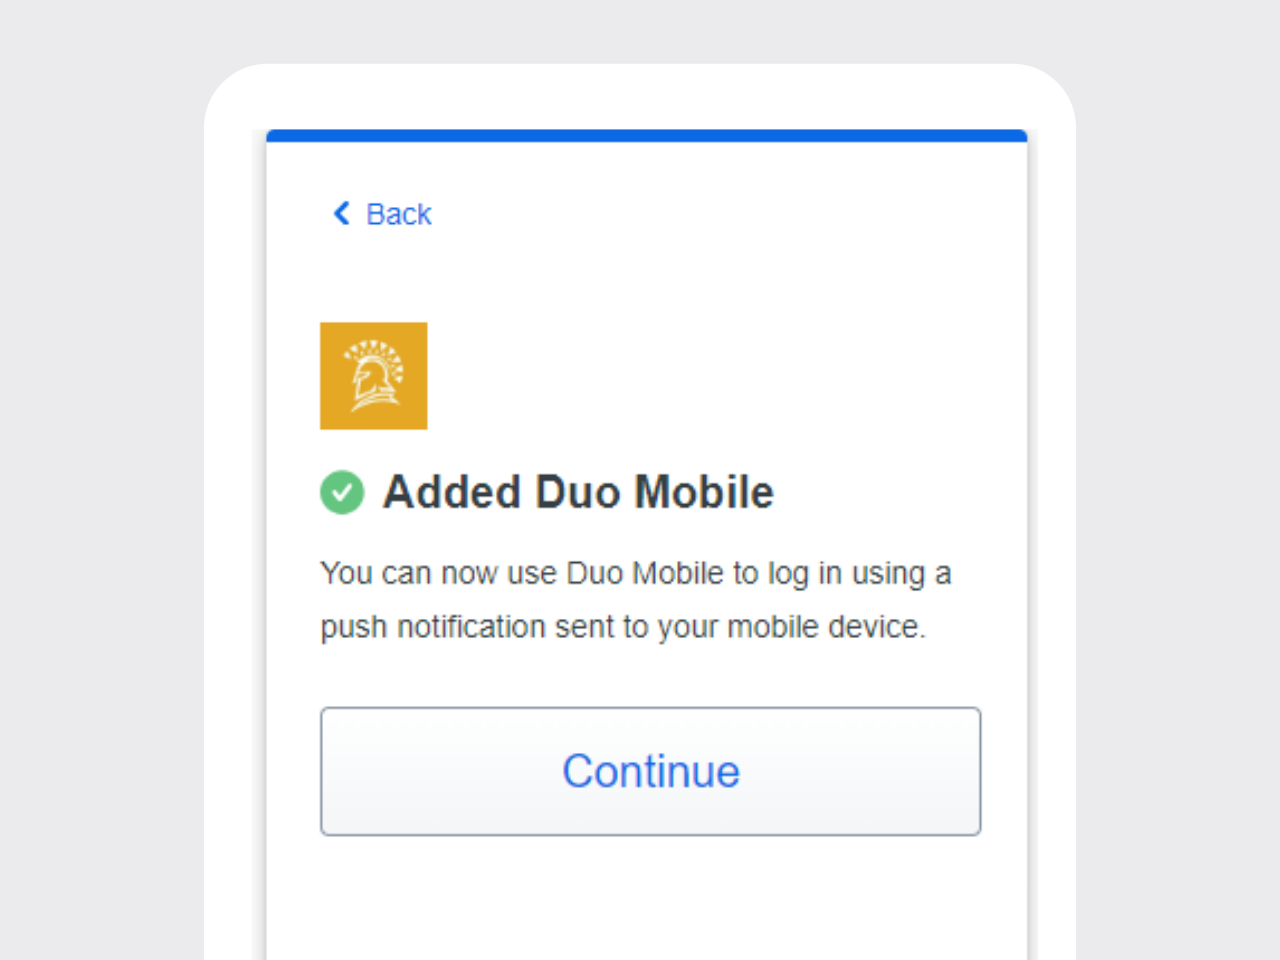 Confirmation that account was added to Duo Mobile.